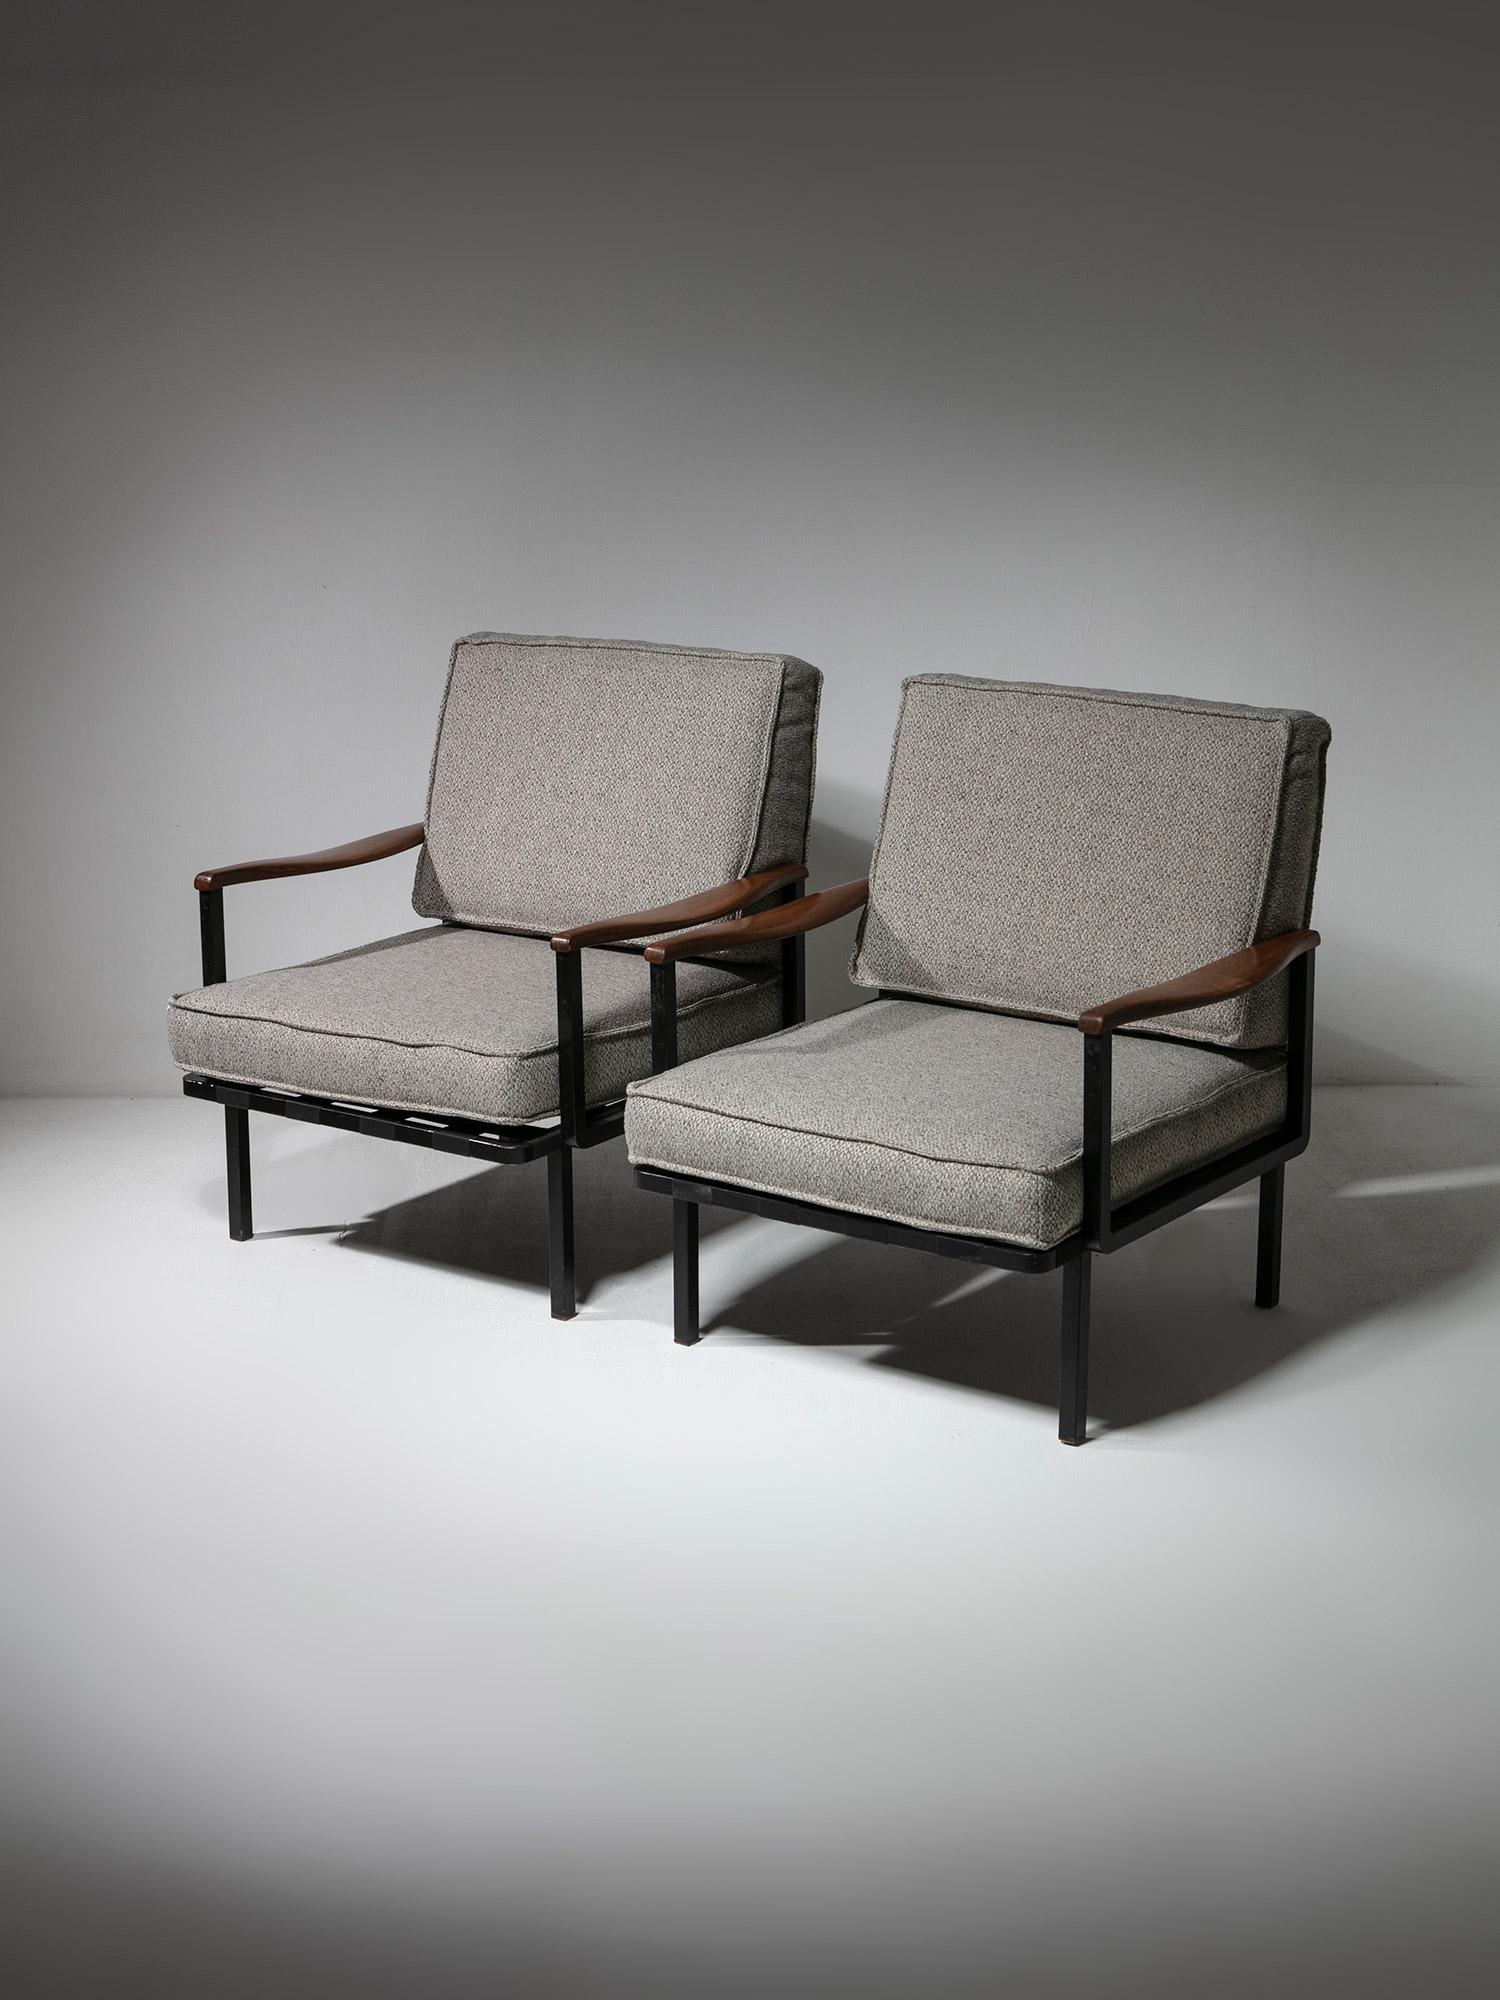 Lounge chairs model P24 by Osvaldo Borsani for Tecno.
Surprising combination of sleek wood armrests on metal frame.
Chairs can also be connected together creating a comfortable settee.